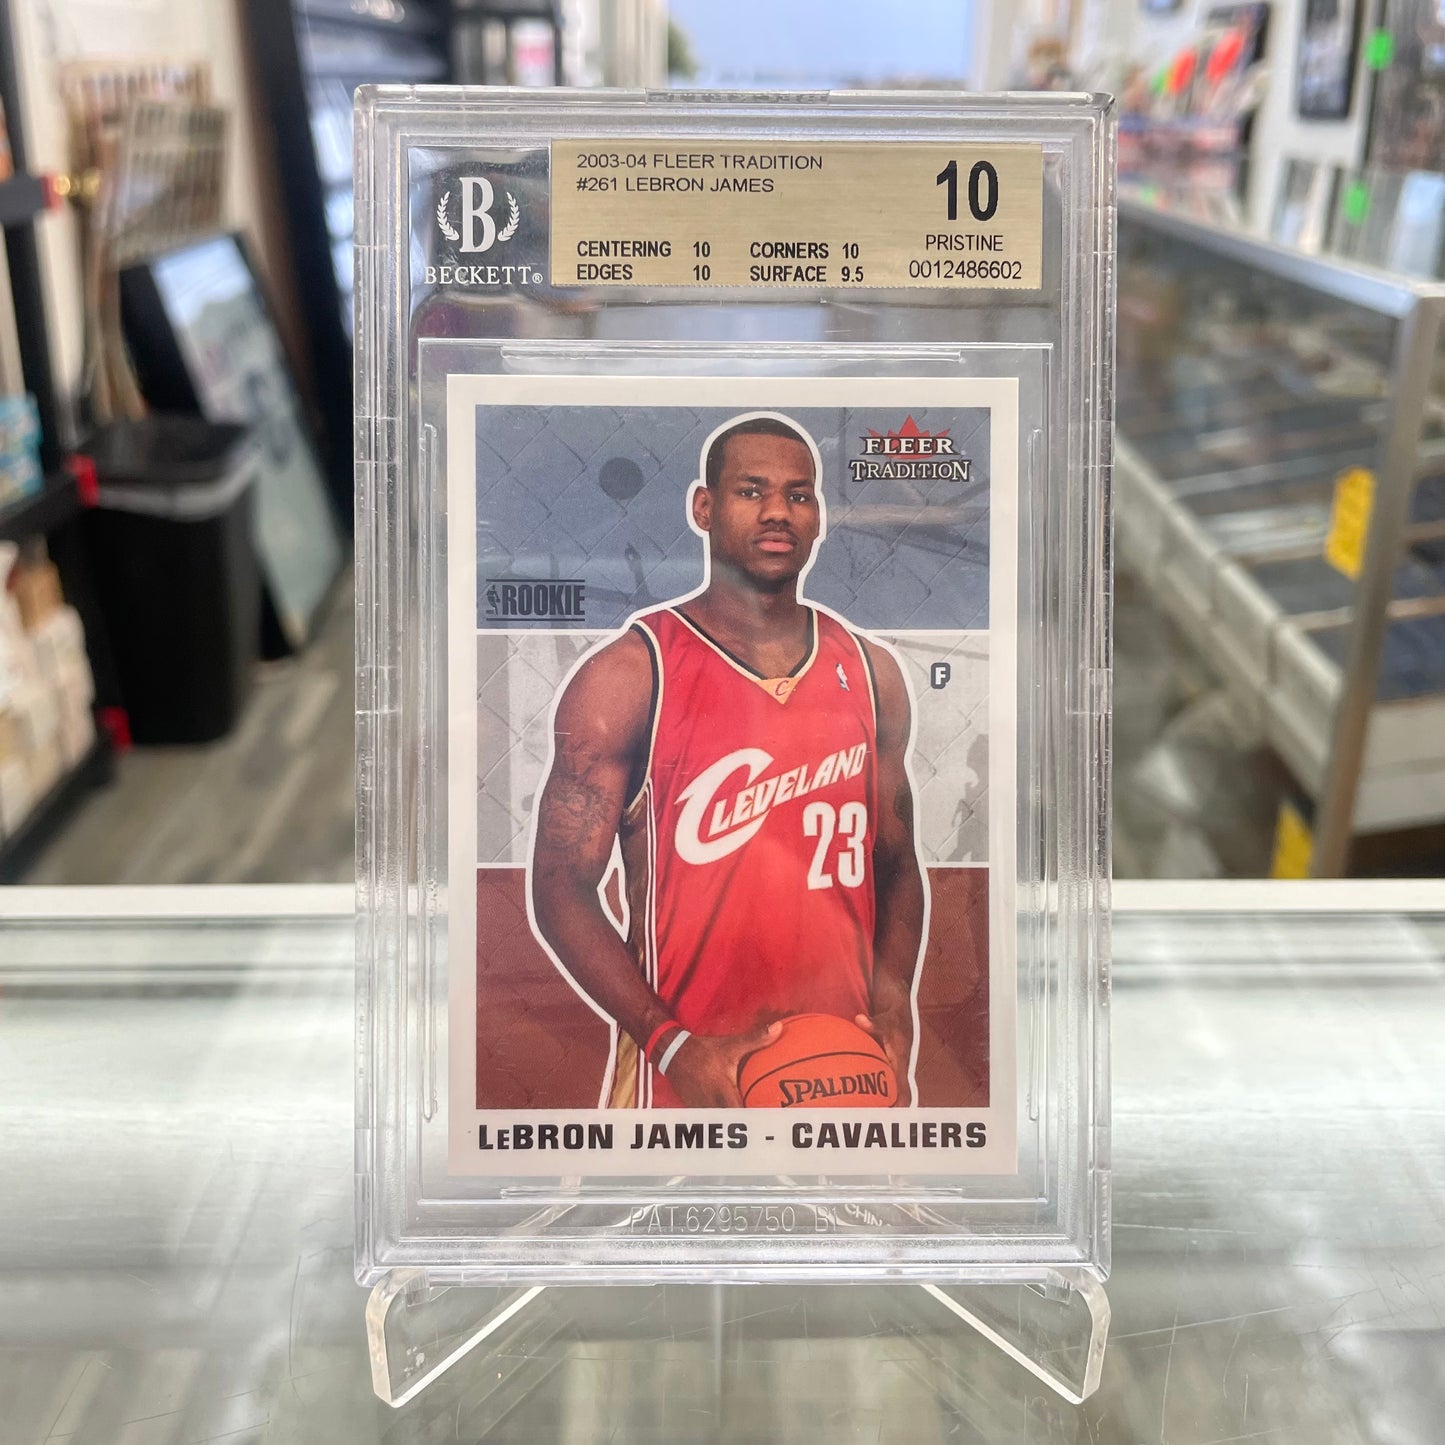 2003-04 NBA Fleer Tradition Lebron James Rookie RC BGS 10 PRISTINE (3 10 SUBGRADES / .5 AWAY FROM BLACK LABEL)